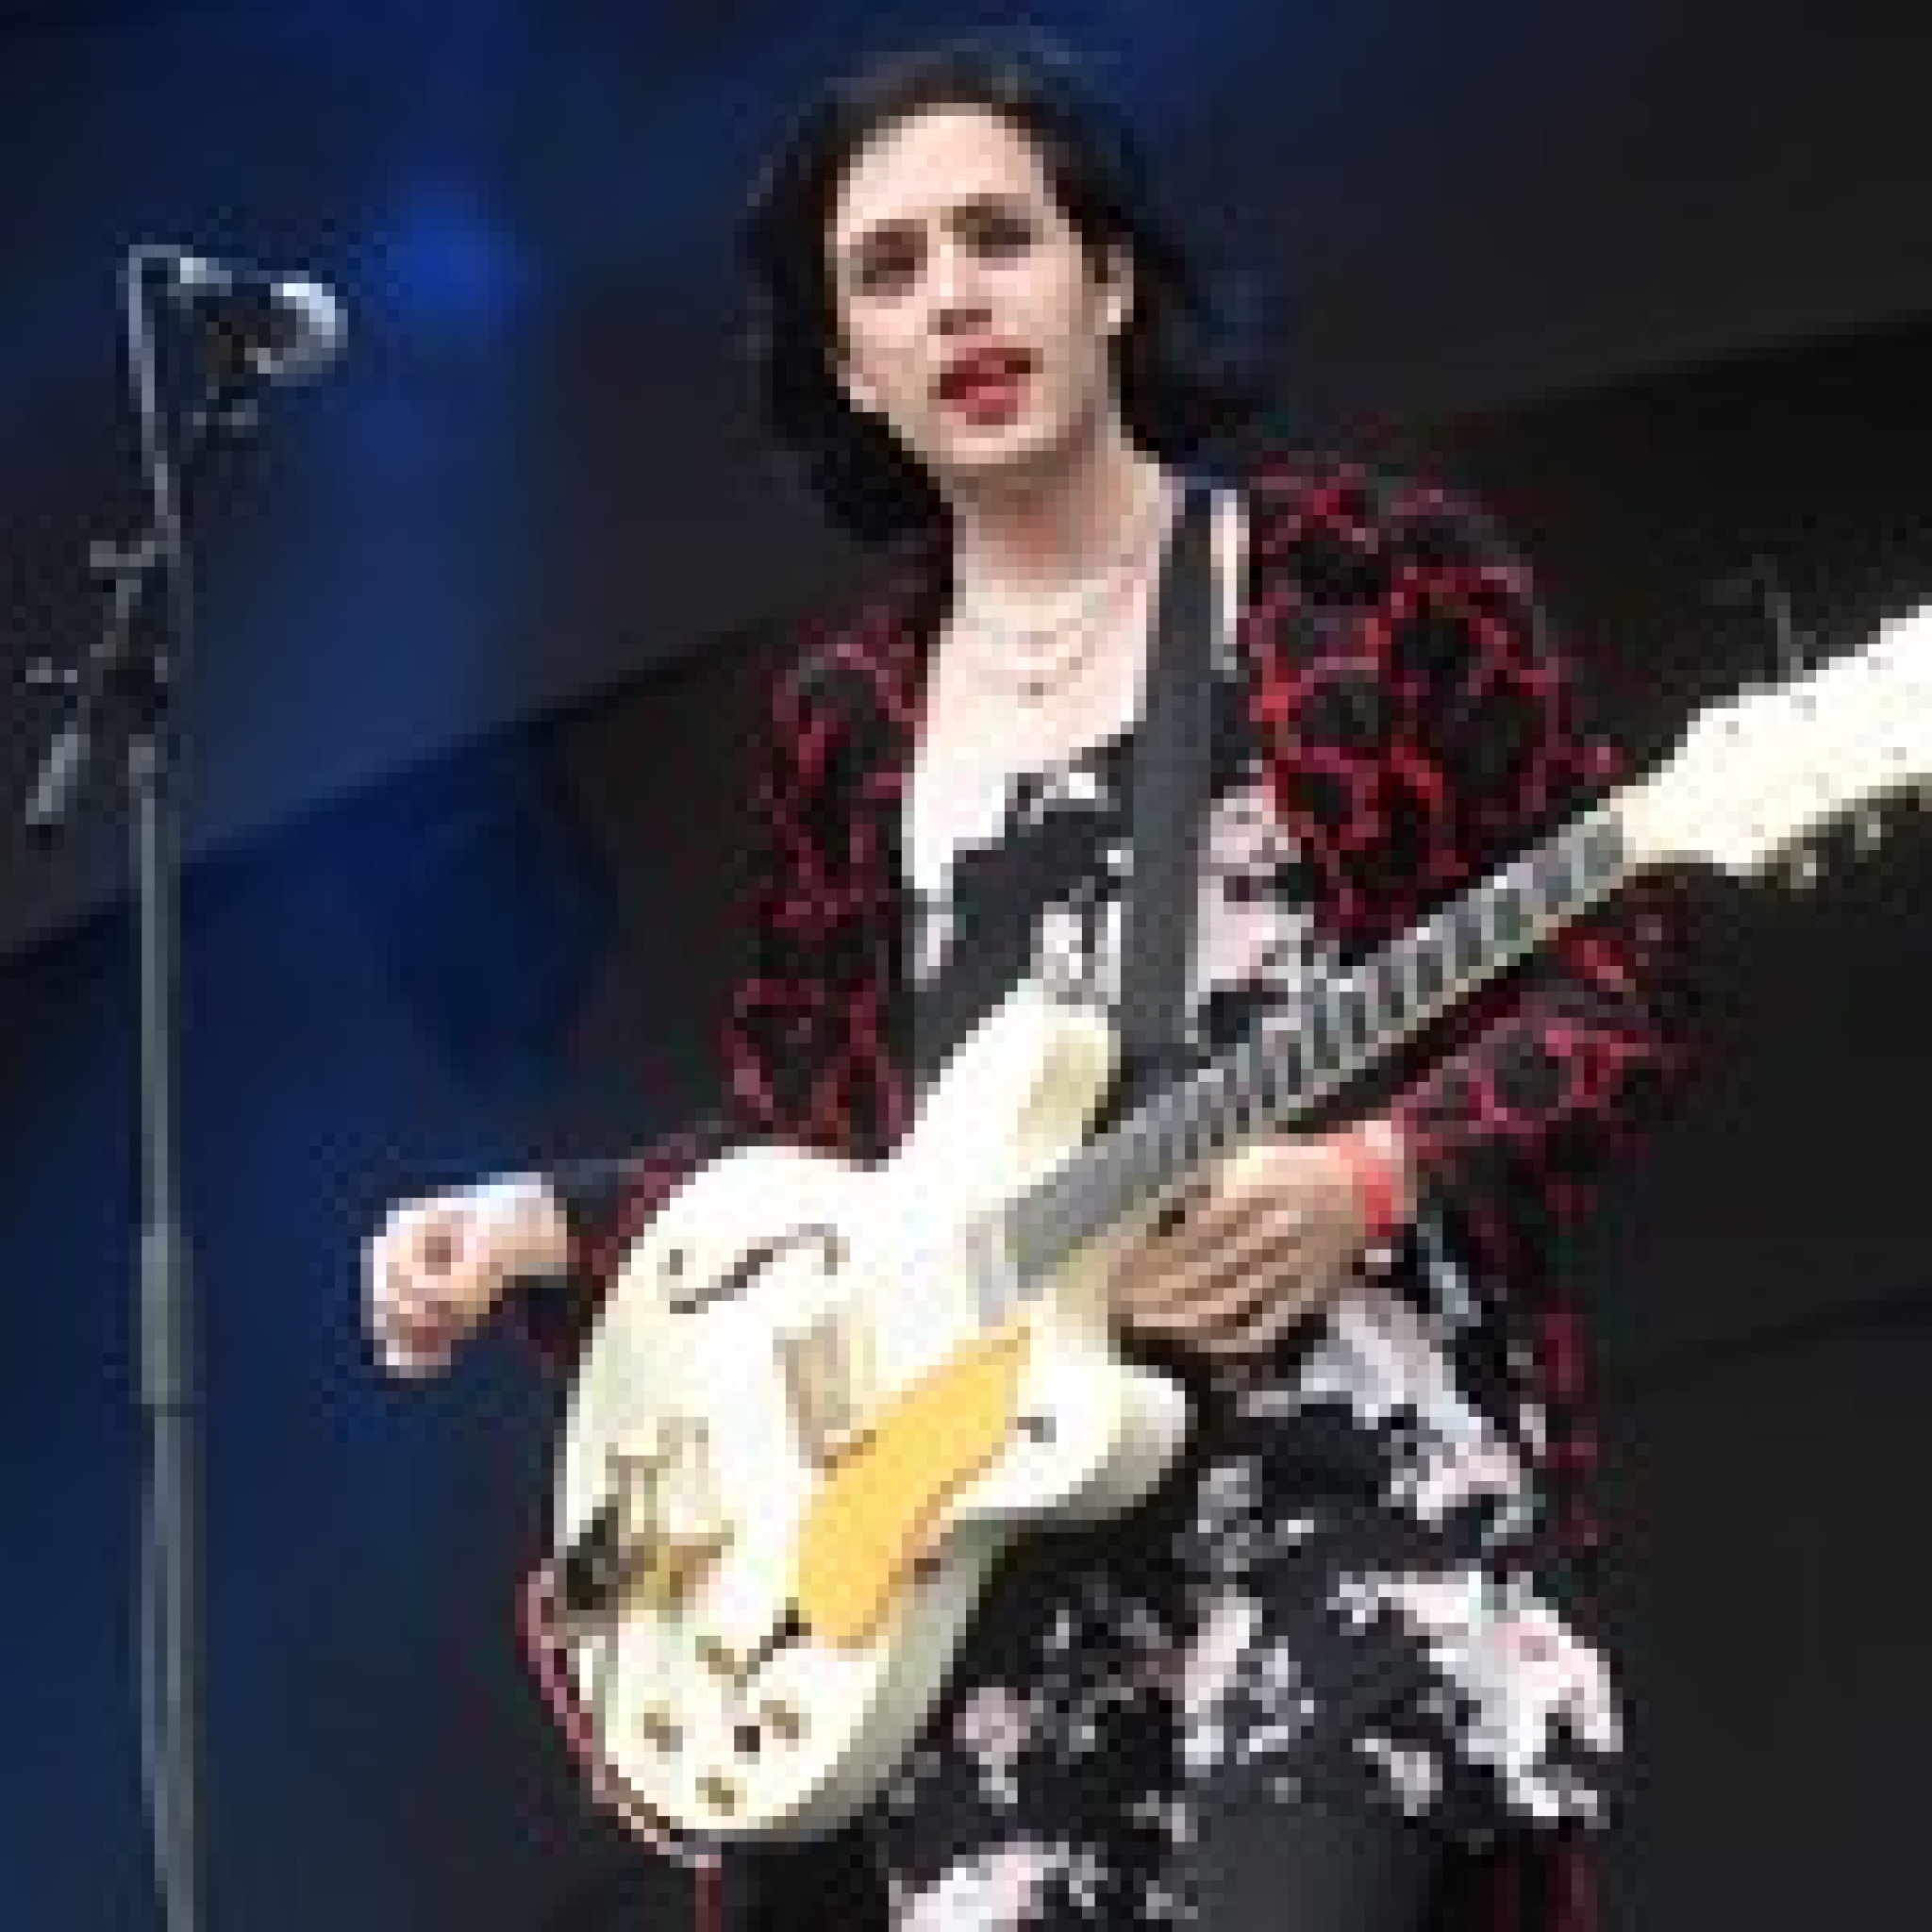 Ezra Furman Comes Out as a Transgender Woman: ‘This Has Not Been an Easy Journey’